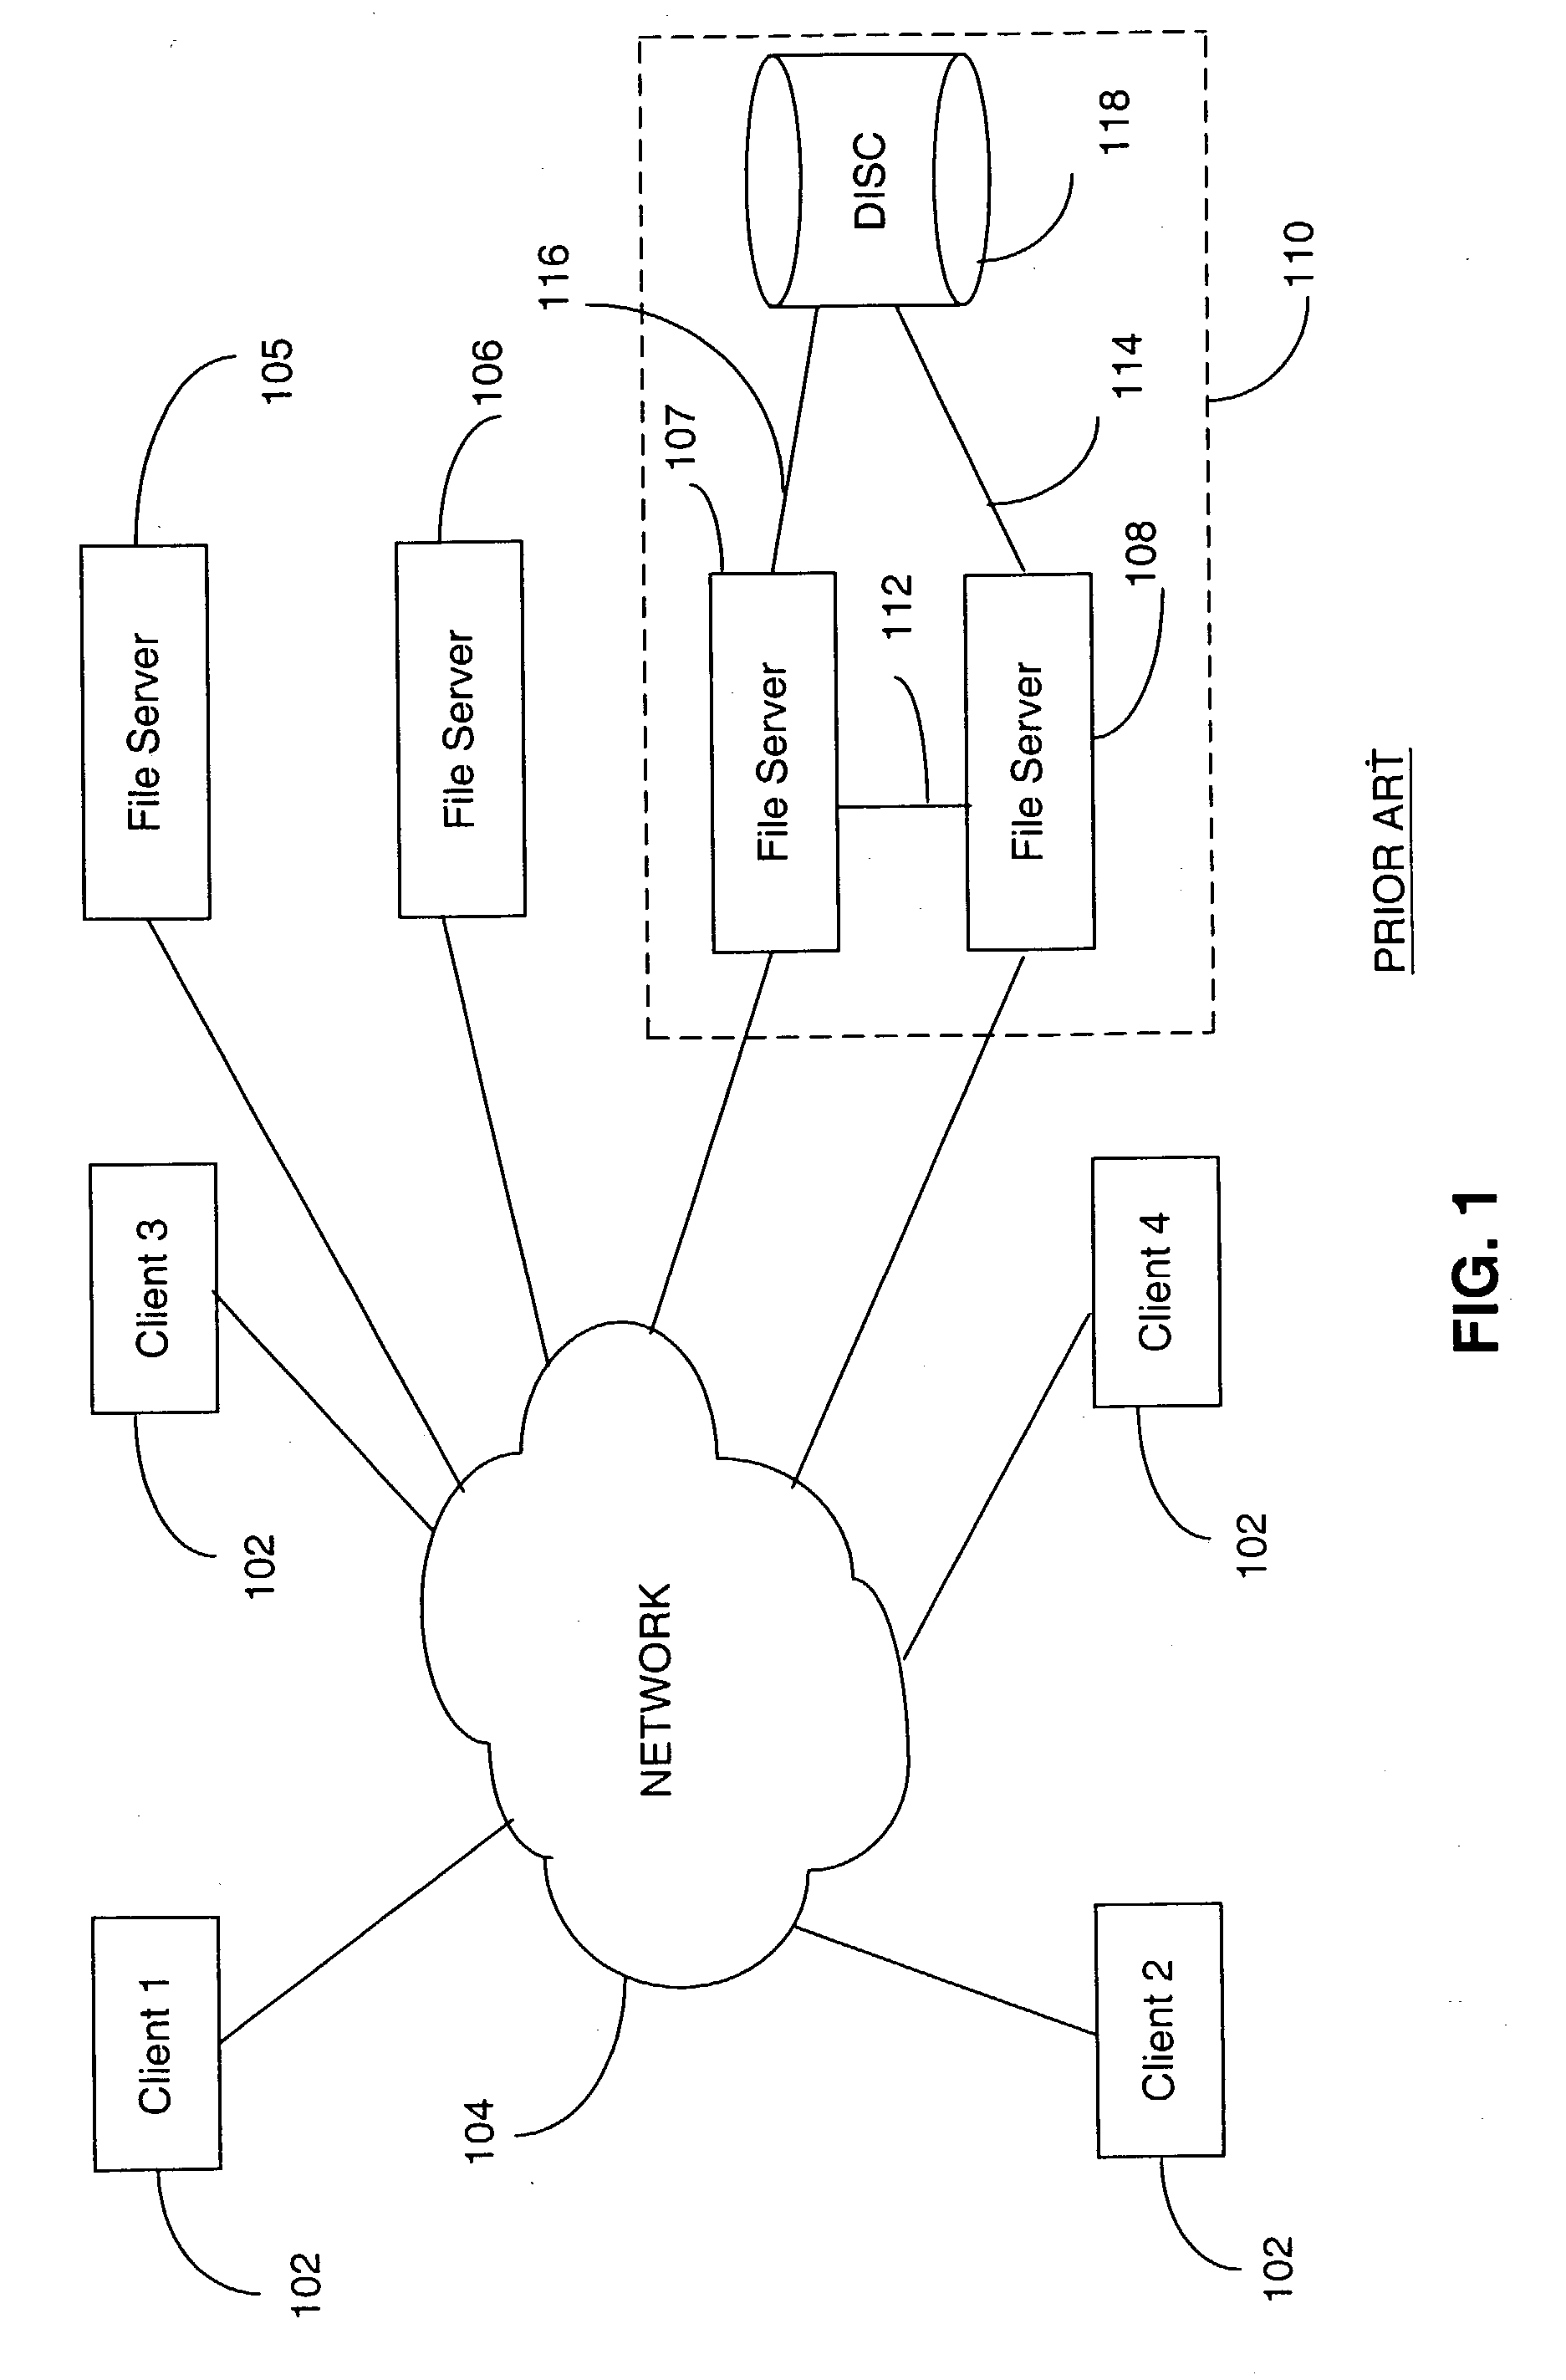 Aggregated opportunistic lock and aggregated implicit lock management for locking aggregated files in a switched file system